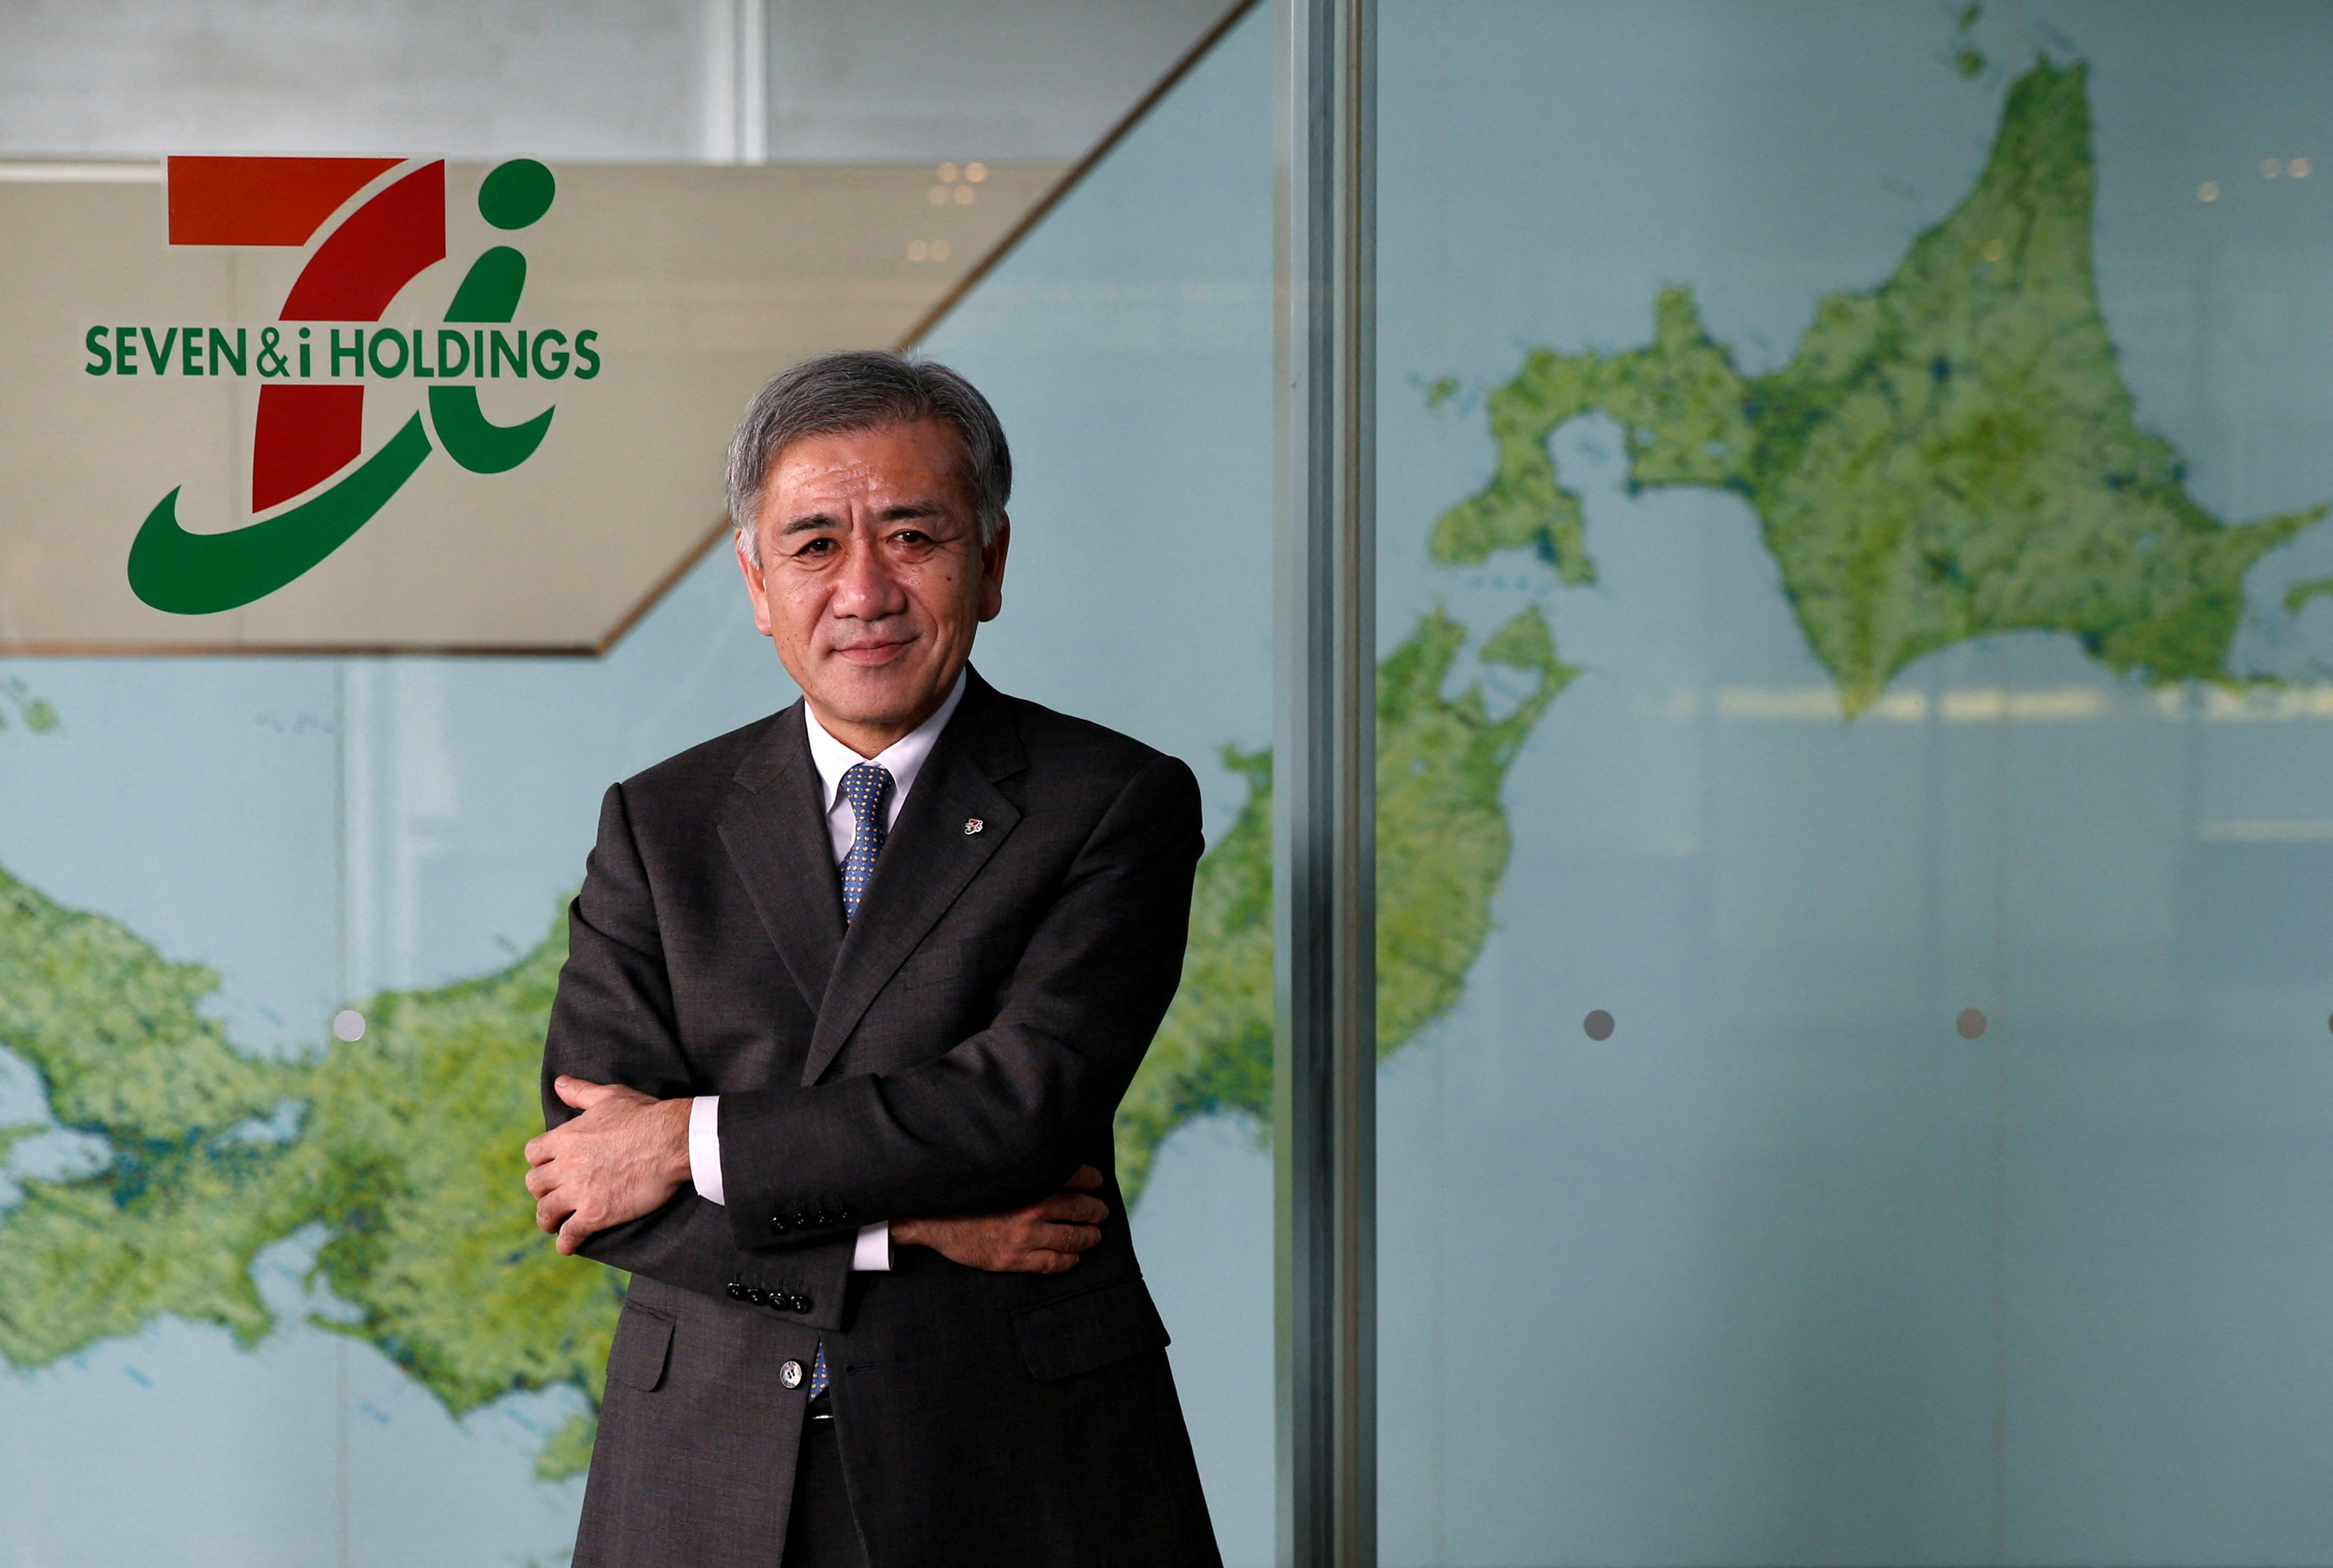 7-Eleven spin-off would jeopardise growth, CEO says, pushing back at ValueAct